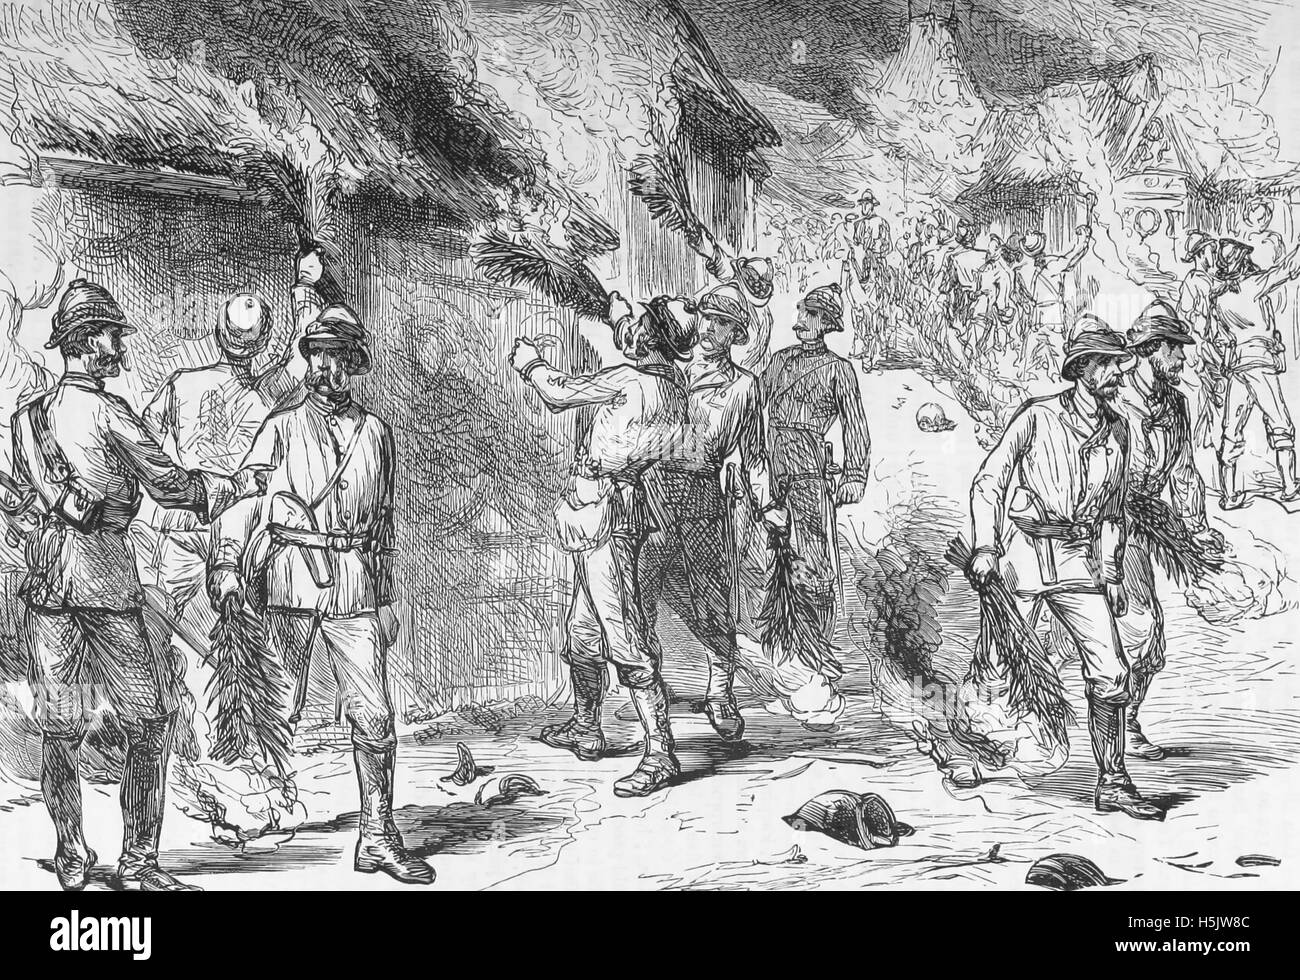 THIRD ASHANTI WAR 1873-1874  British troops set fire to Kumasi on  4 February 1874. Engraving from The Graphic Stock Photo